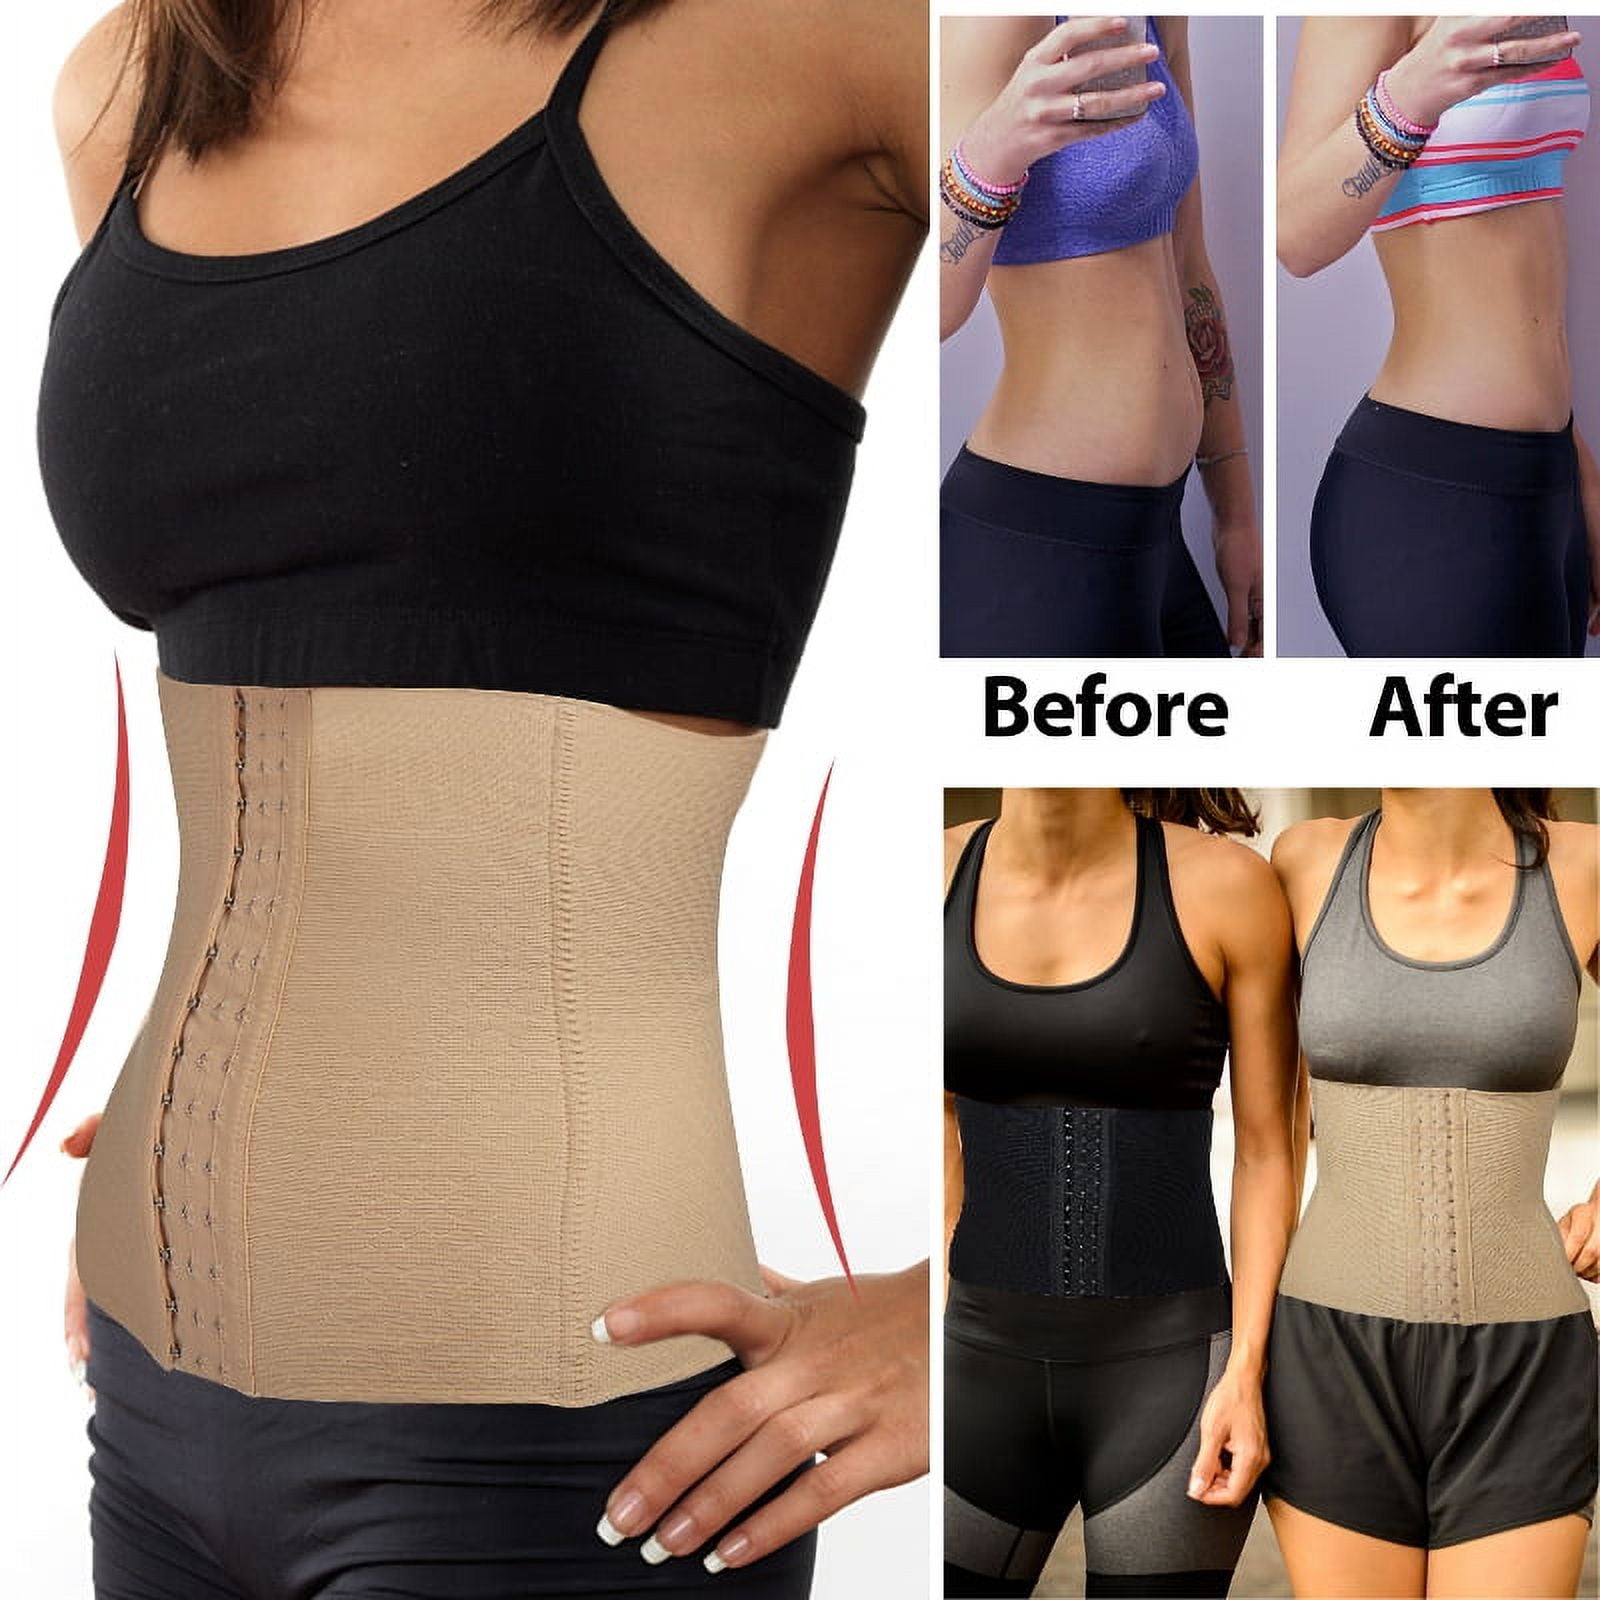  Collections Etc Women's Shapewear Waist Cincher & Waist Trainer  : Clothing, Shoes & Jewelry